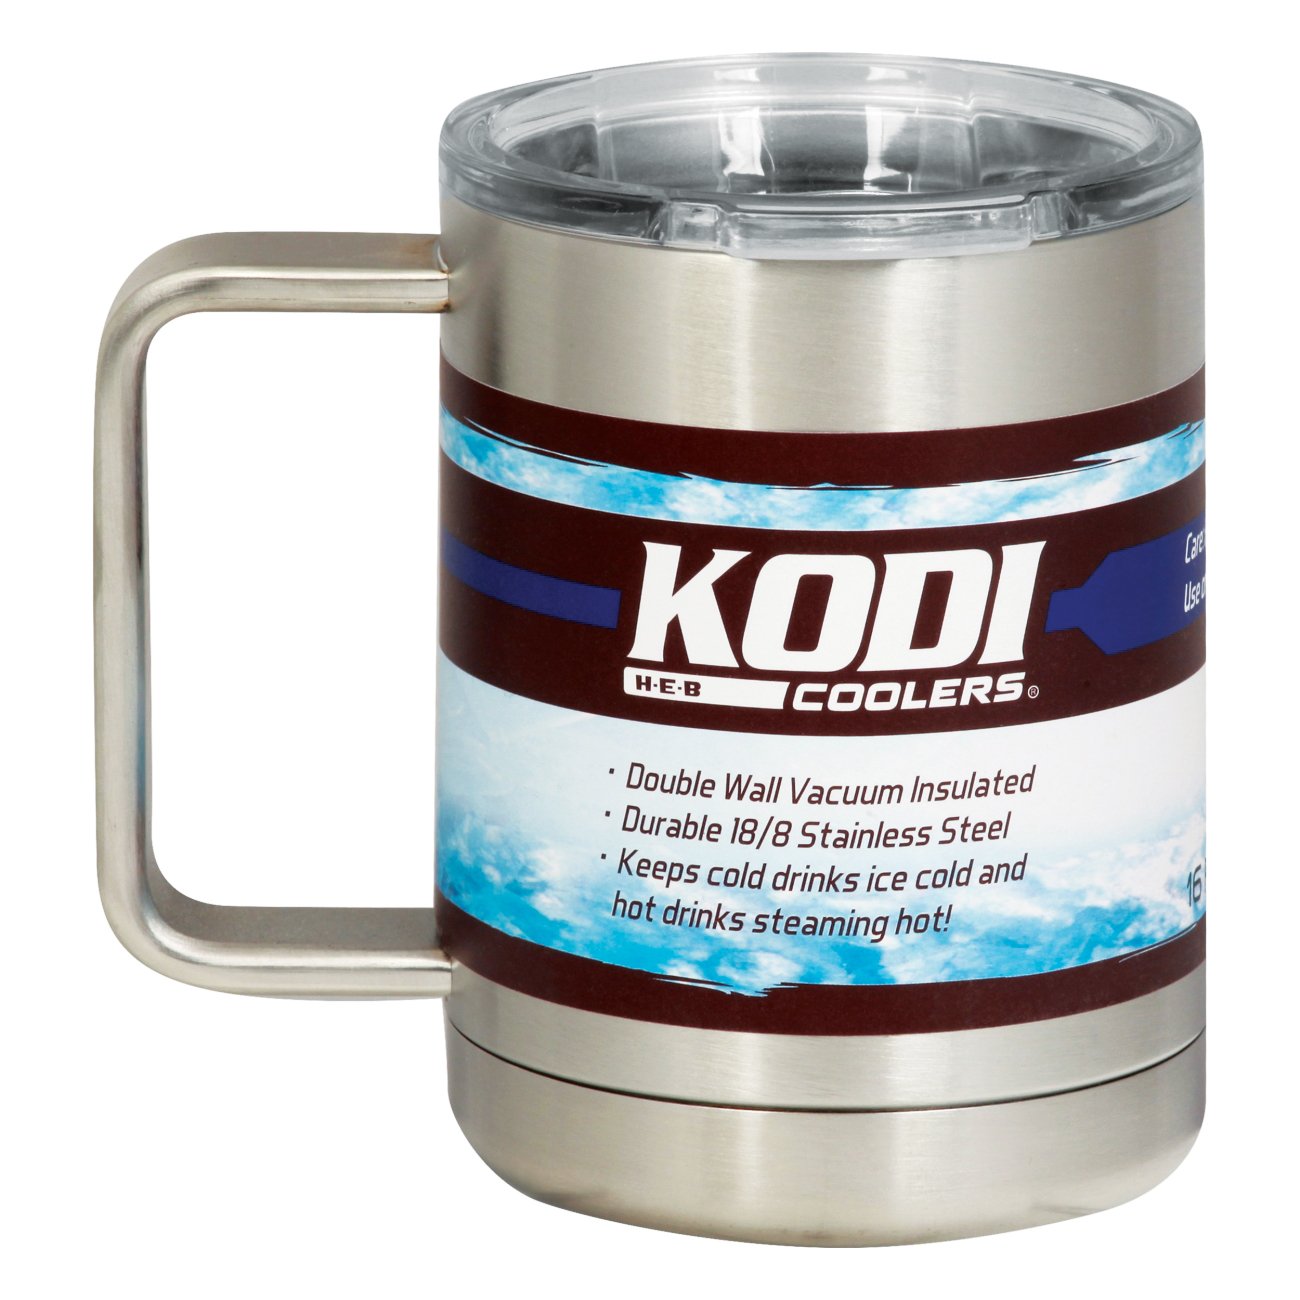 KODI by H-E-B Silver Stainless Steel Mug - Shop Travel & To-Go at